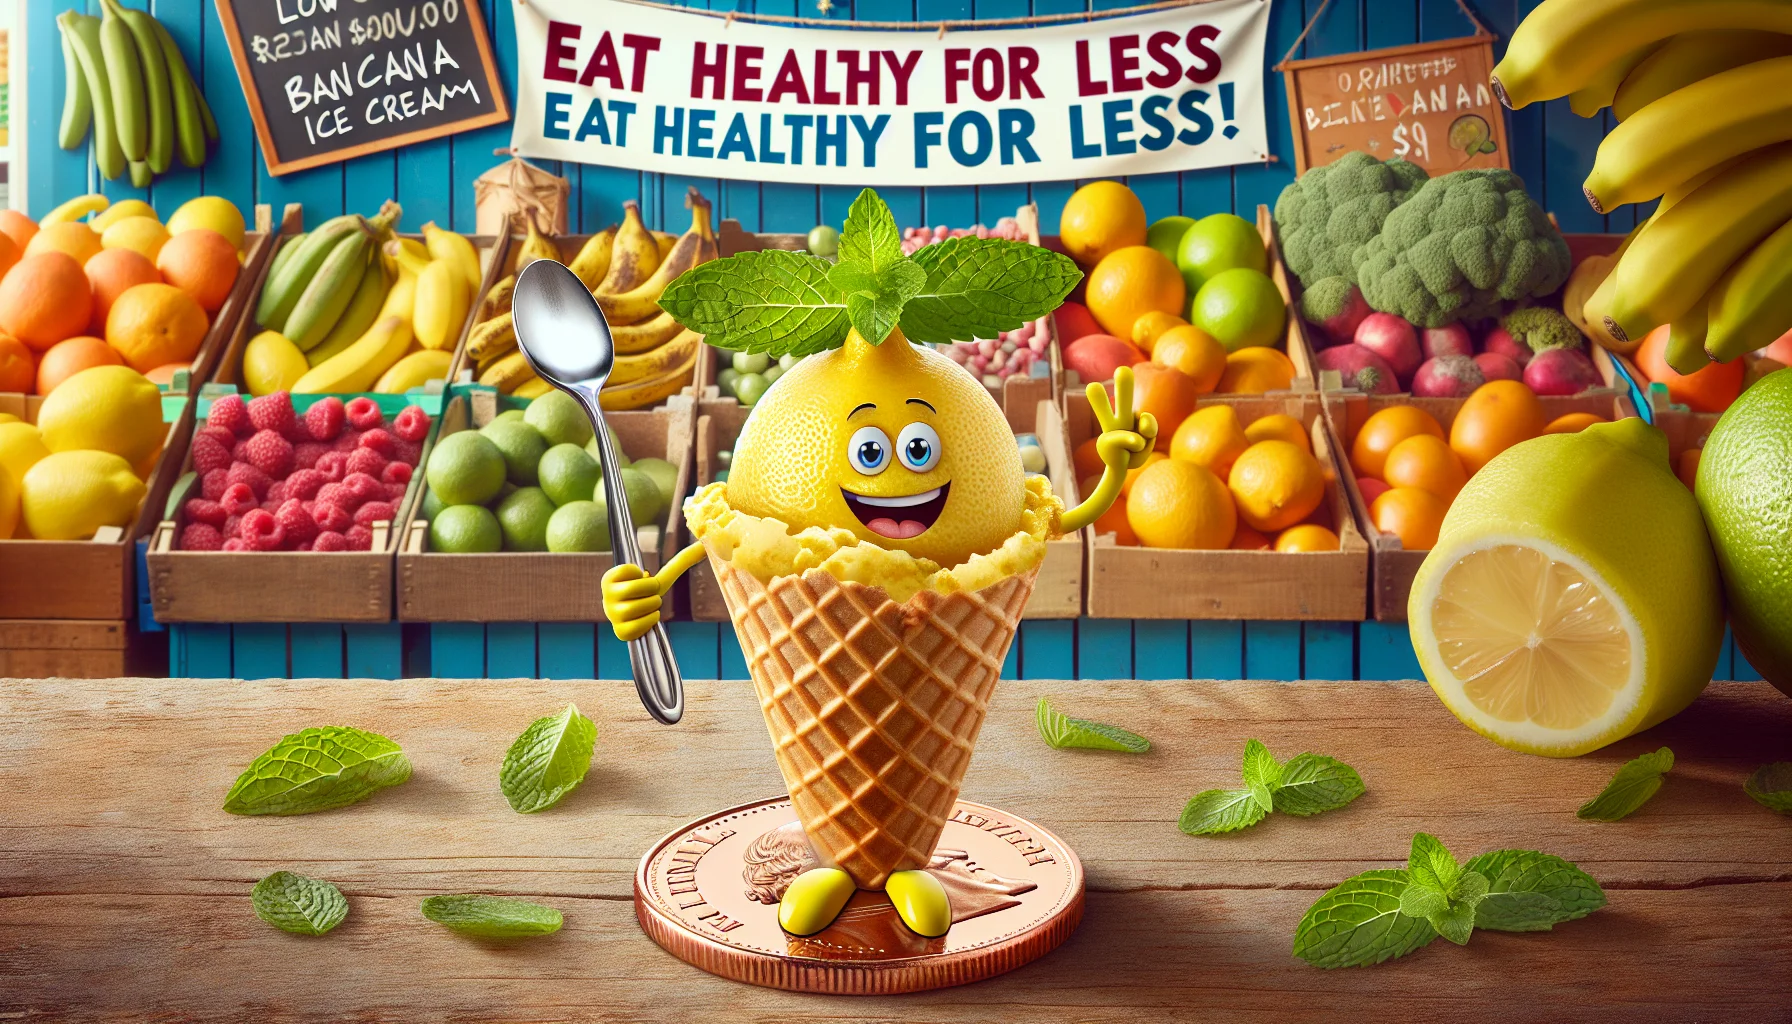 Create an amusing and lively image showcasing a low-cost healthy dessert, focusing on Roasted Banana Ice Cream. The scene involves a quirky lemon standing on a penny, who with a joyful expression, is presenting the delicious ice cream. The ice cream consists of scrumptious scoops of roasted banana ice cream, adorned with fresh mint leaves for garnish. The setting is a colorful farmers market background, with stalls featuring variety of fruits and vegetables, banner above reading 'Eat Healthy for Less!'. The ice cream is in a cornet, made to look even more appetizing with a golden hue emanating from it.